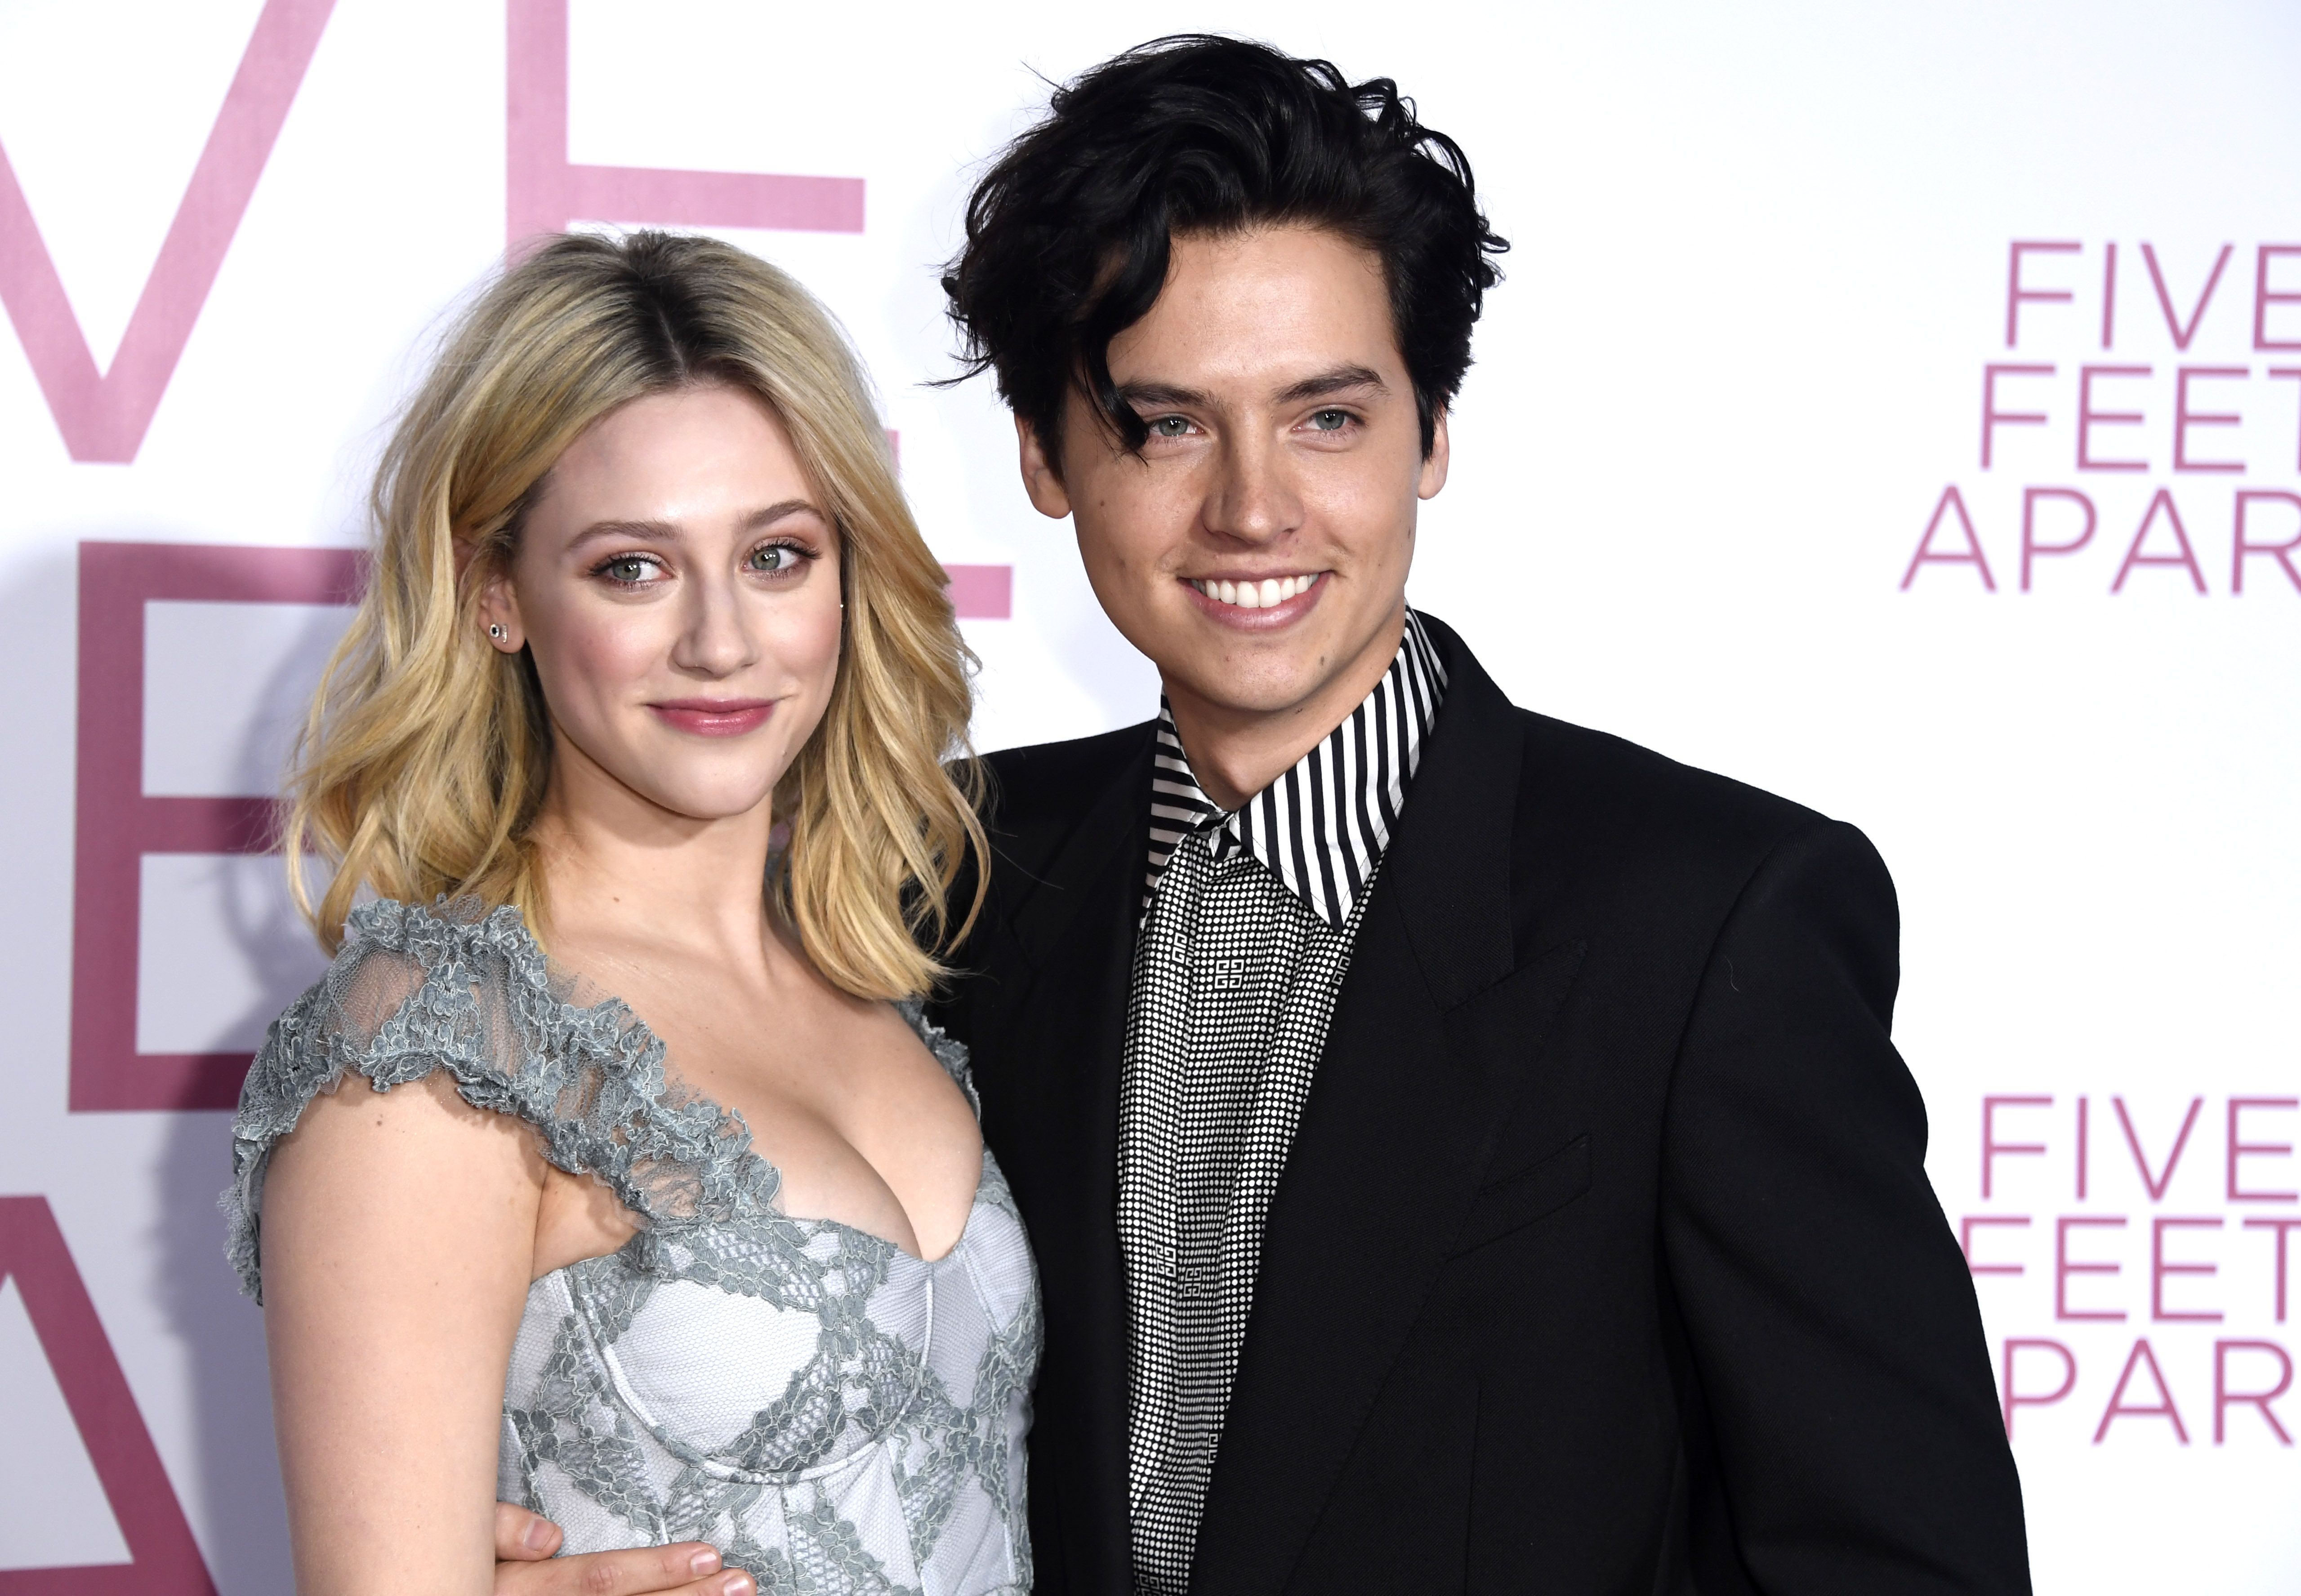 The Real Reason Cole and Lili Skipped the 2019 Teen Choice Awards